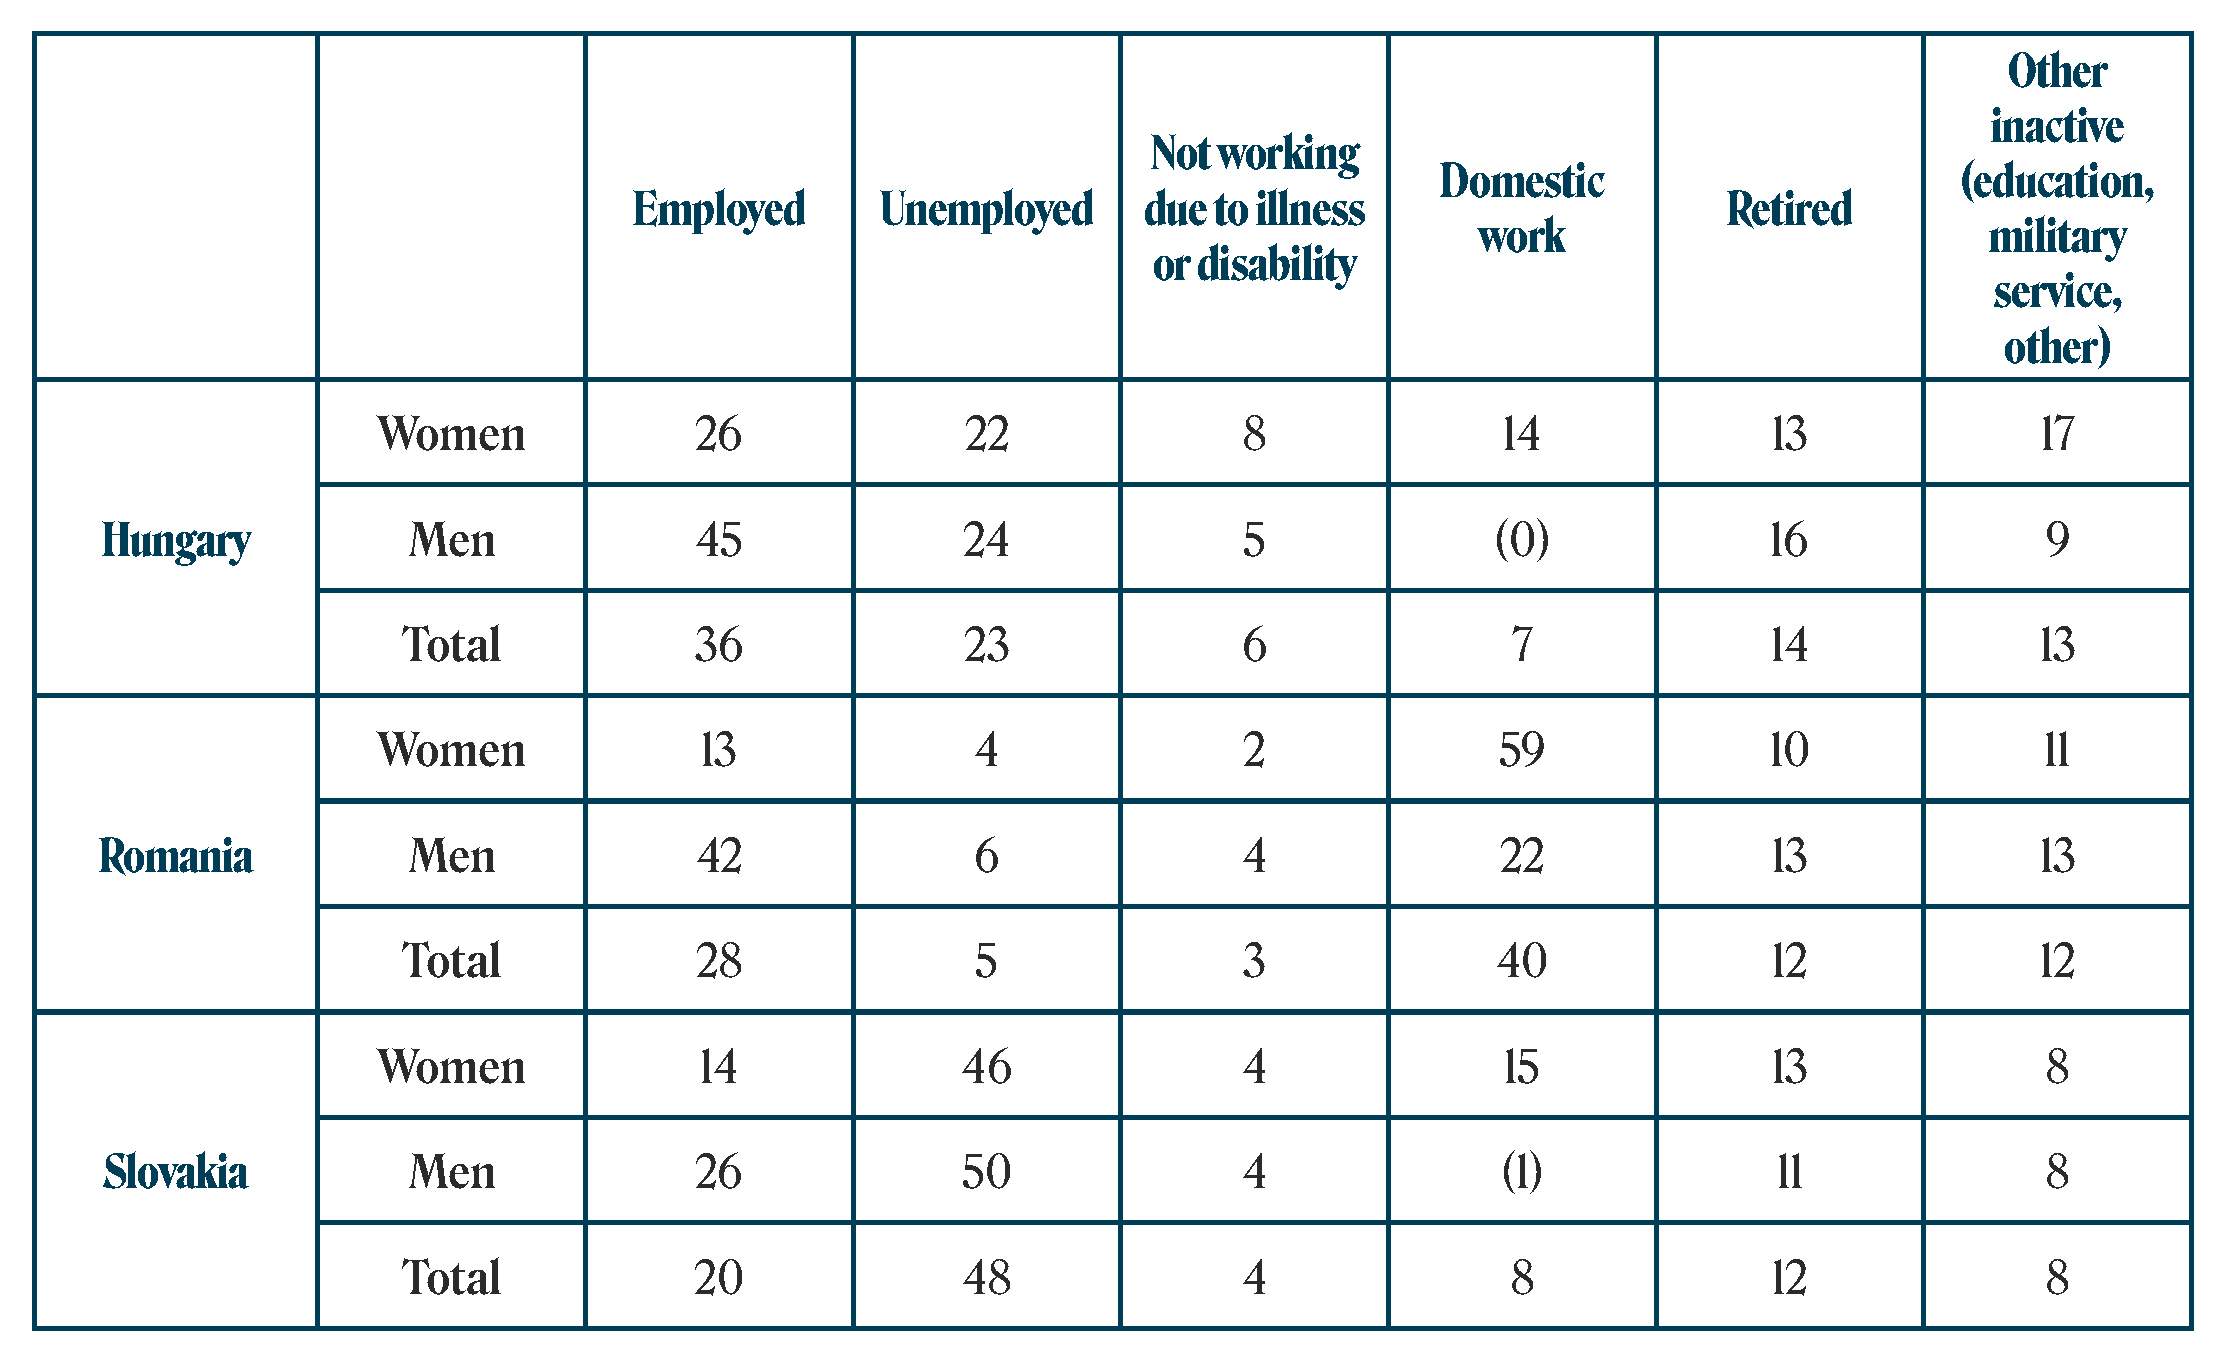 Table - Employment data in Hungary, Romania, and Slovakia